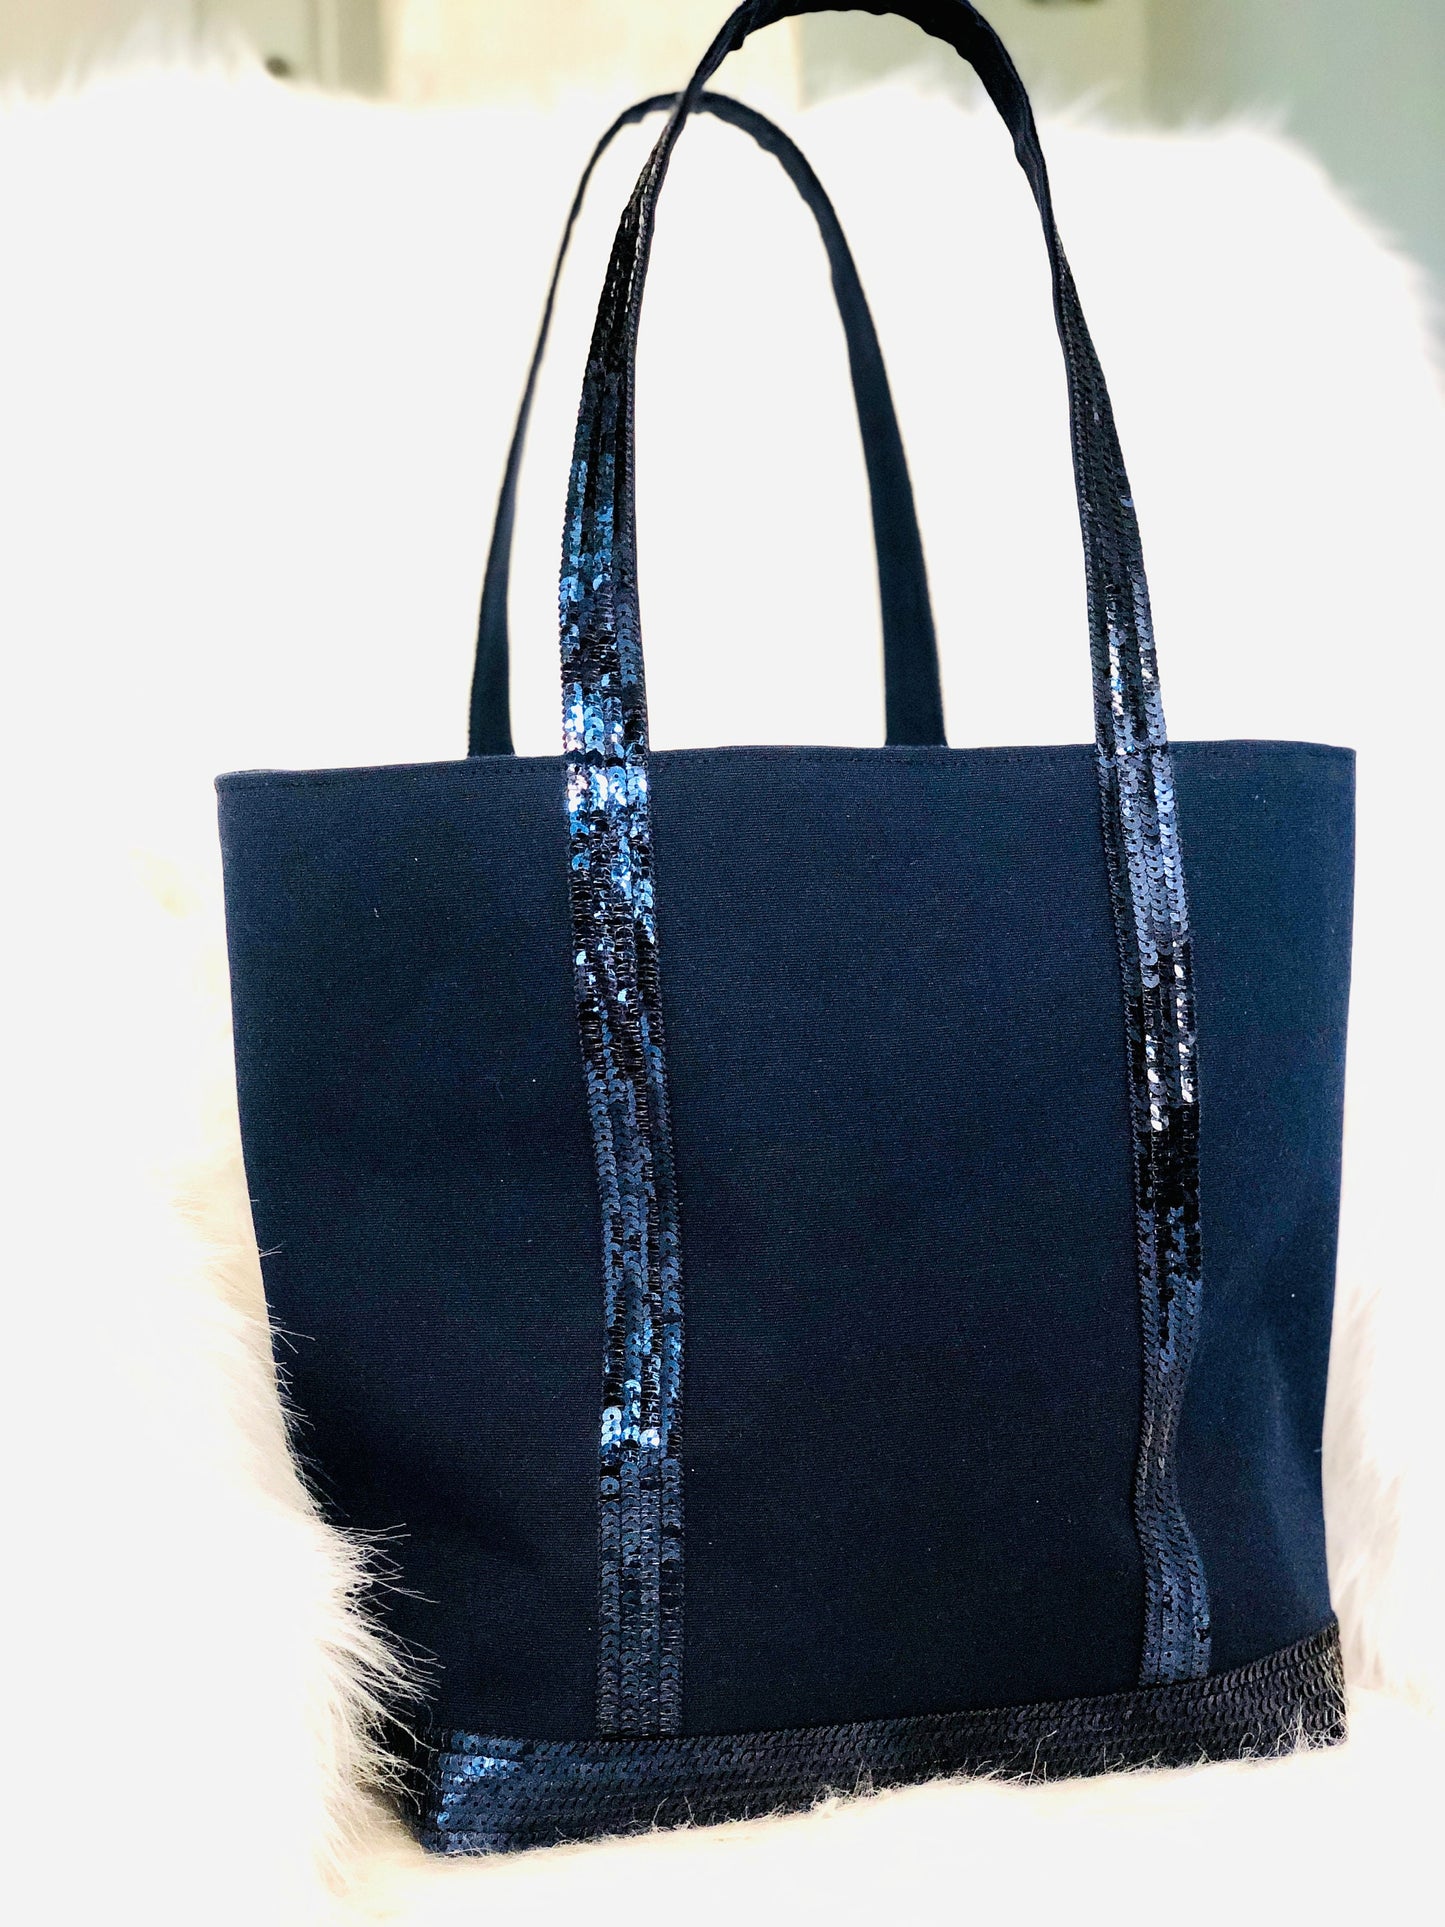 Navy blue tote bag with sequins worn on the shoulder, navy tote bag with zippered pocket, large bag for navy blue classes